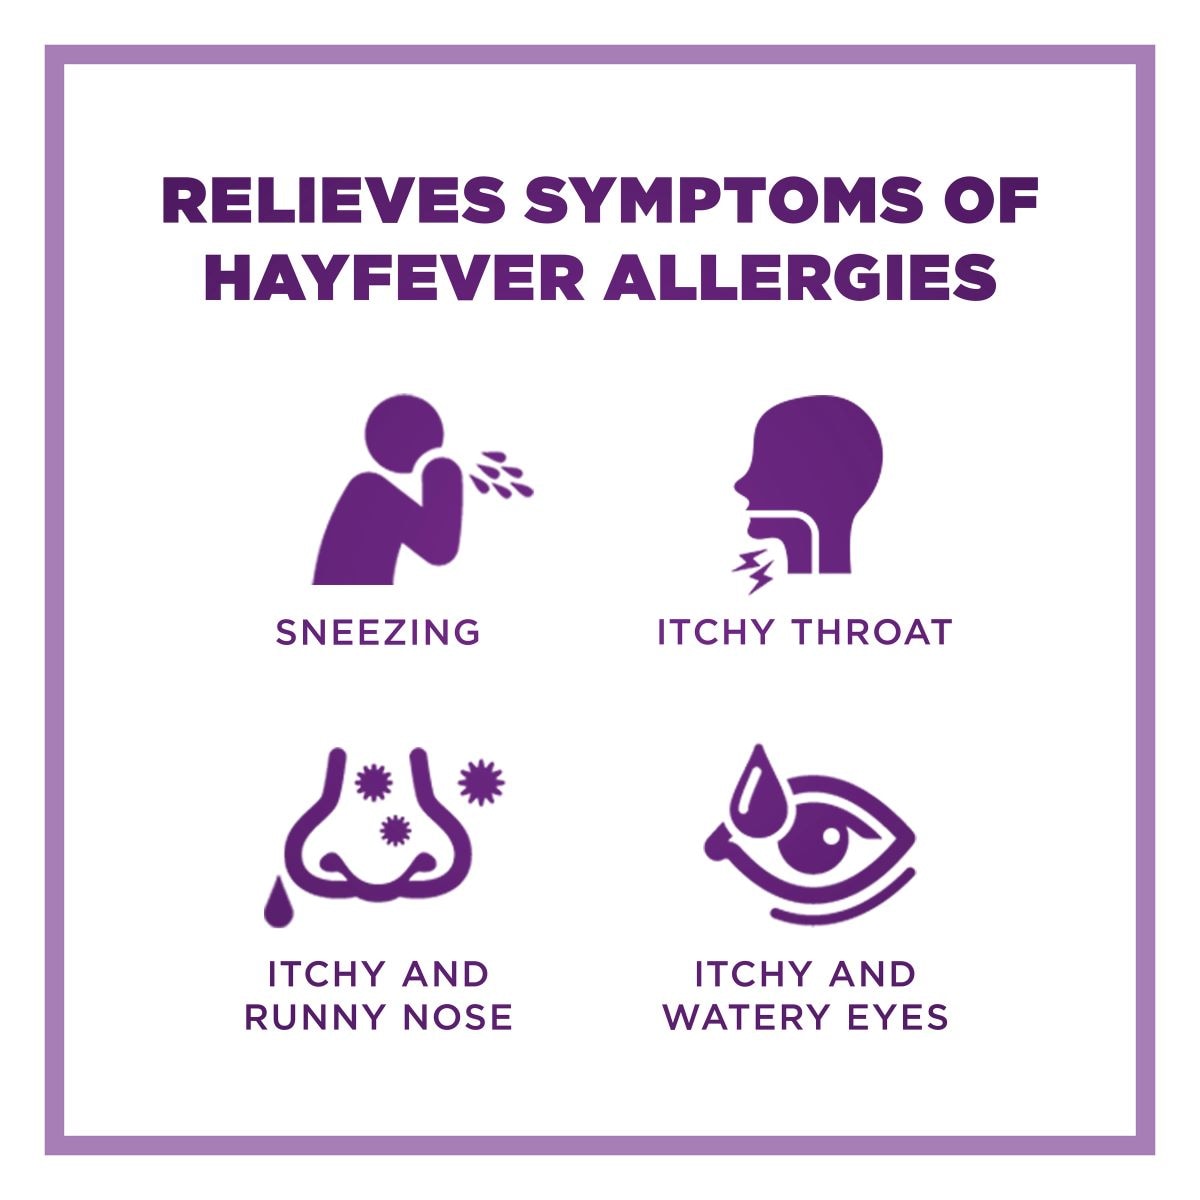 Telfast Allergy & Hayfever Relief 180mg 5 Tablets